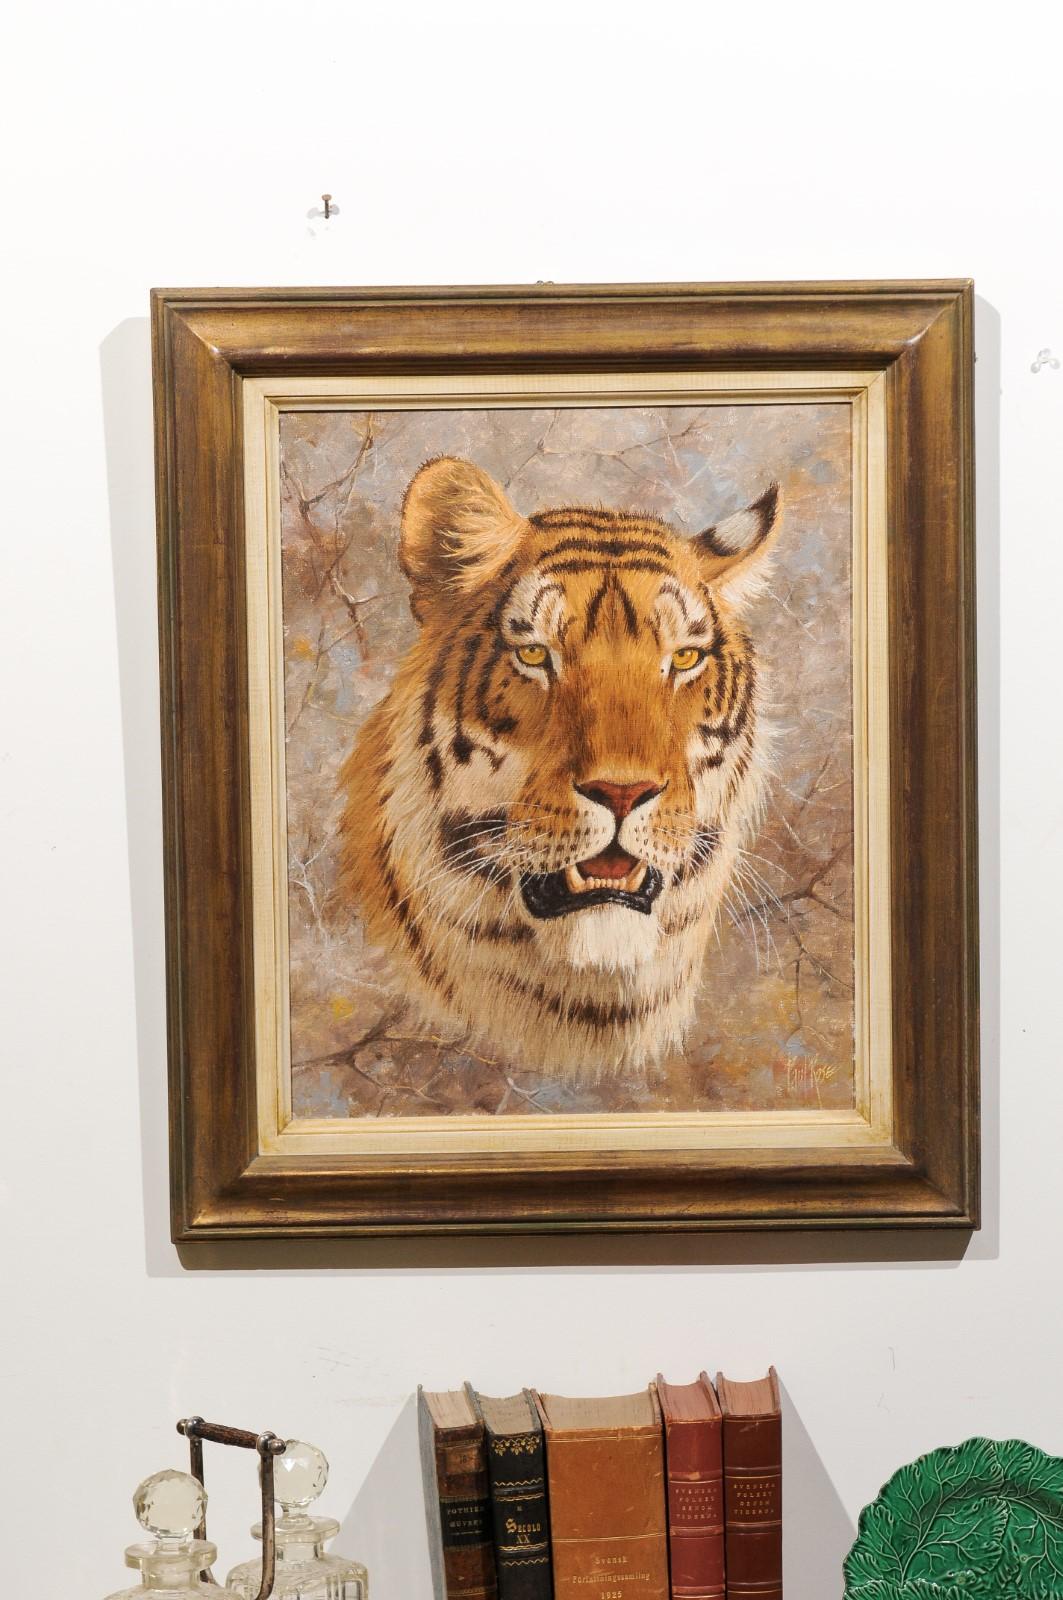 An original Paul Rose framed wildlife painting from the 20th century, depicting a tiger head. Standing out beautifully on an abstracted background accented with small branches, this exquisite painting depicts a tiger looking slightly past us.